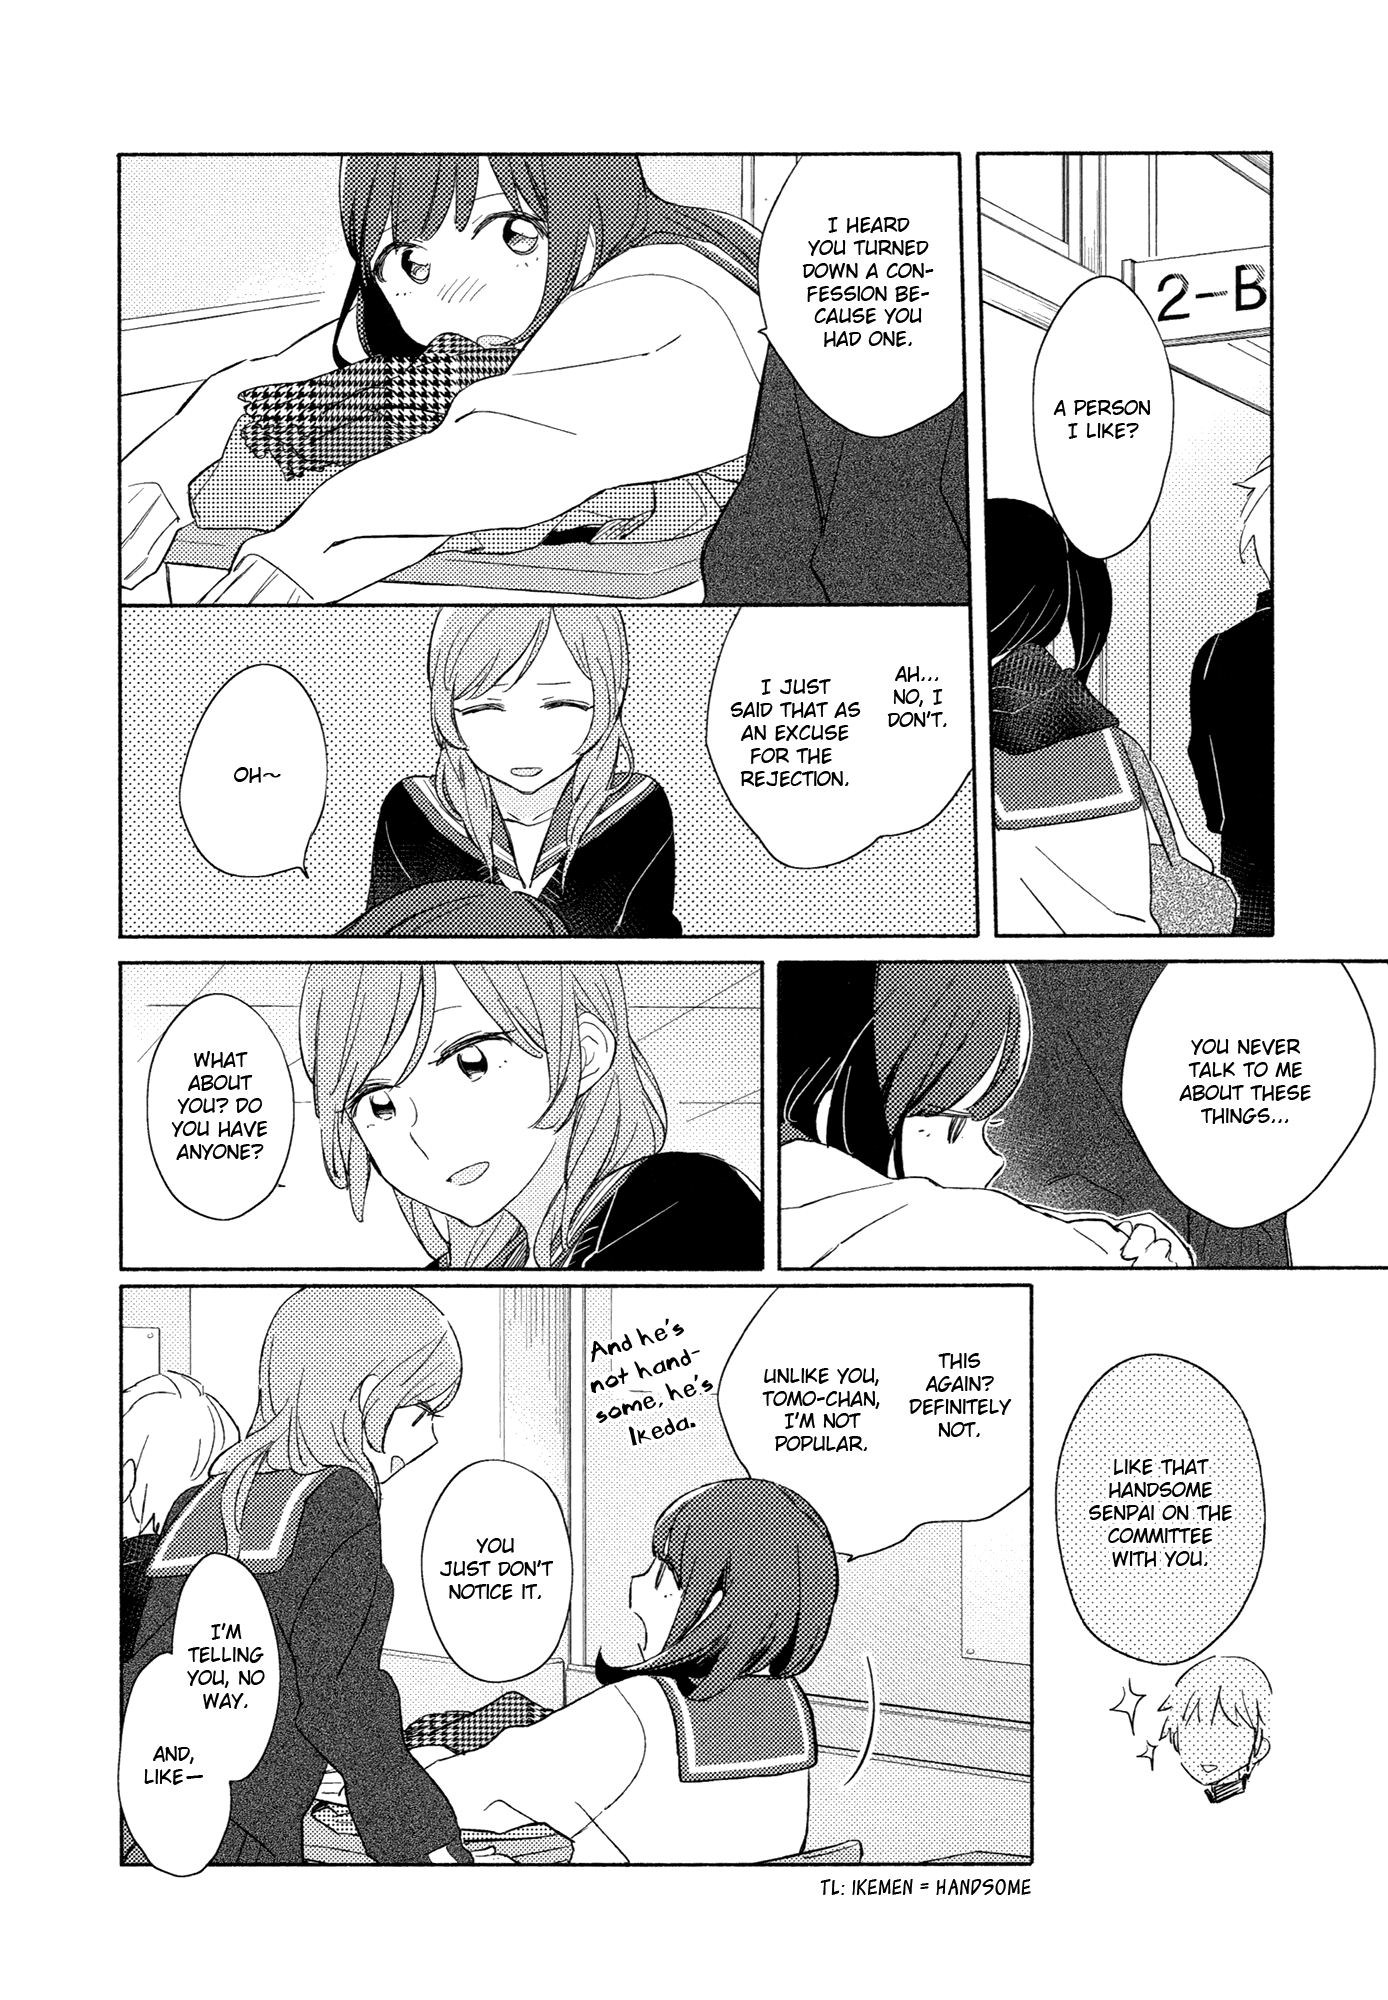 A Cold And After That - Page 2